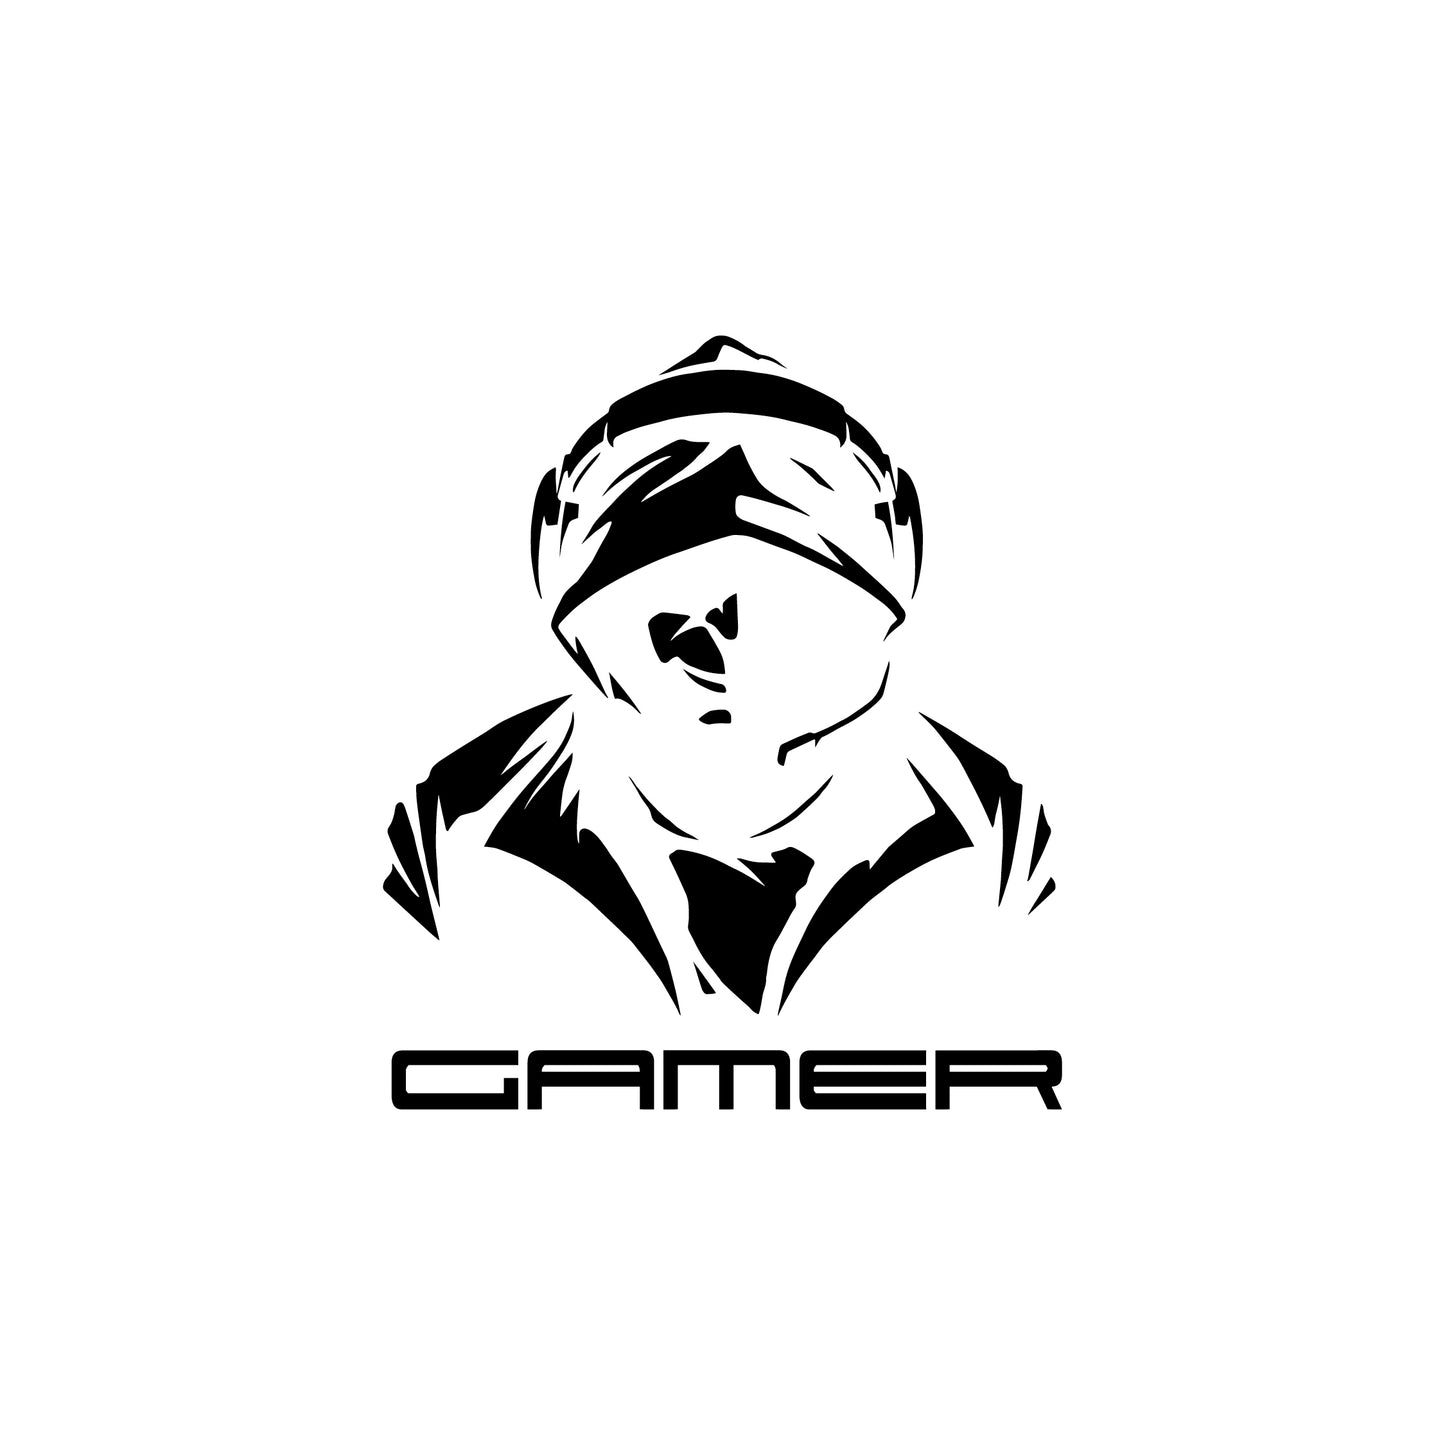 Hooded gamer - Wall decal sticker